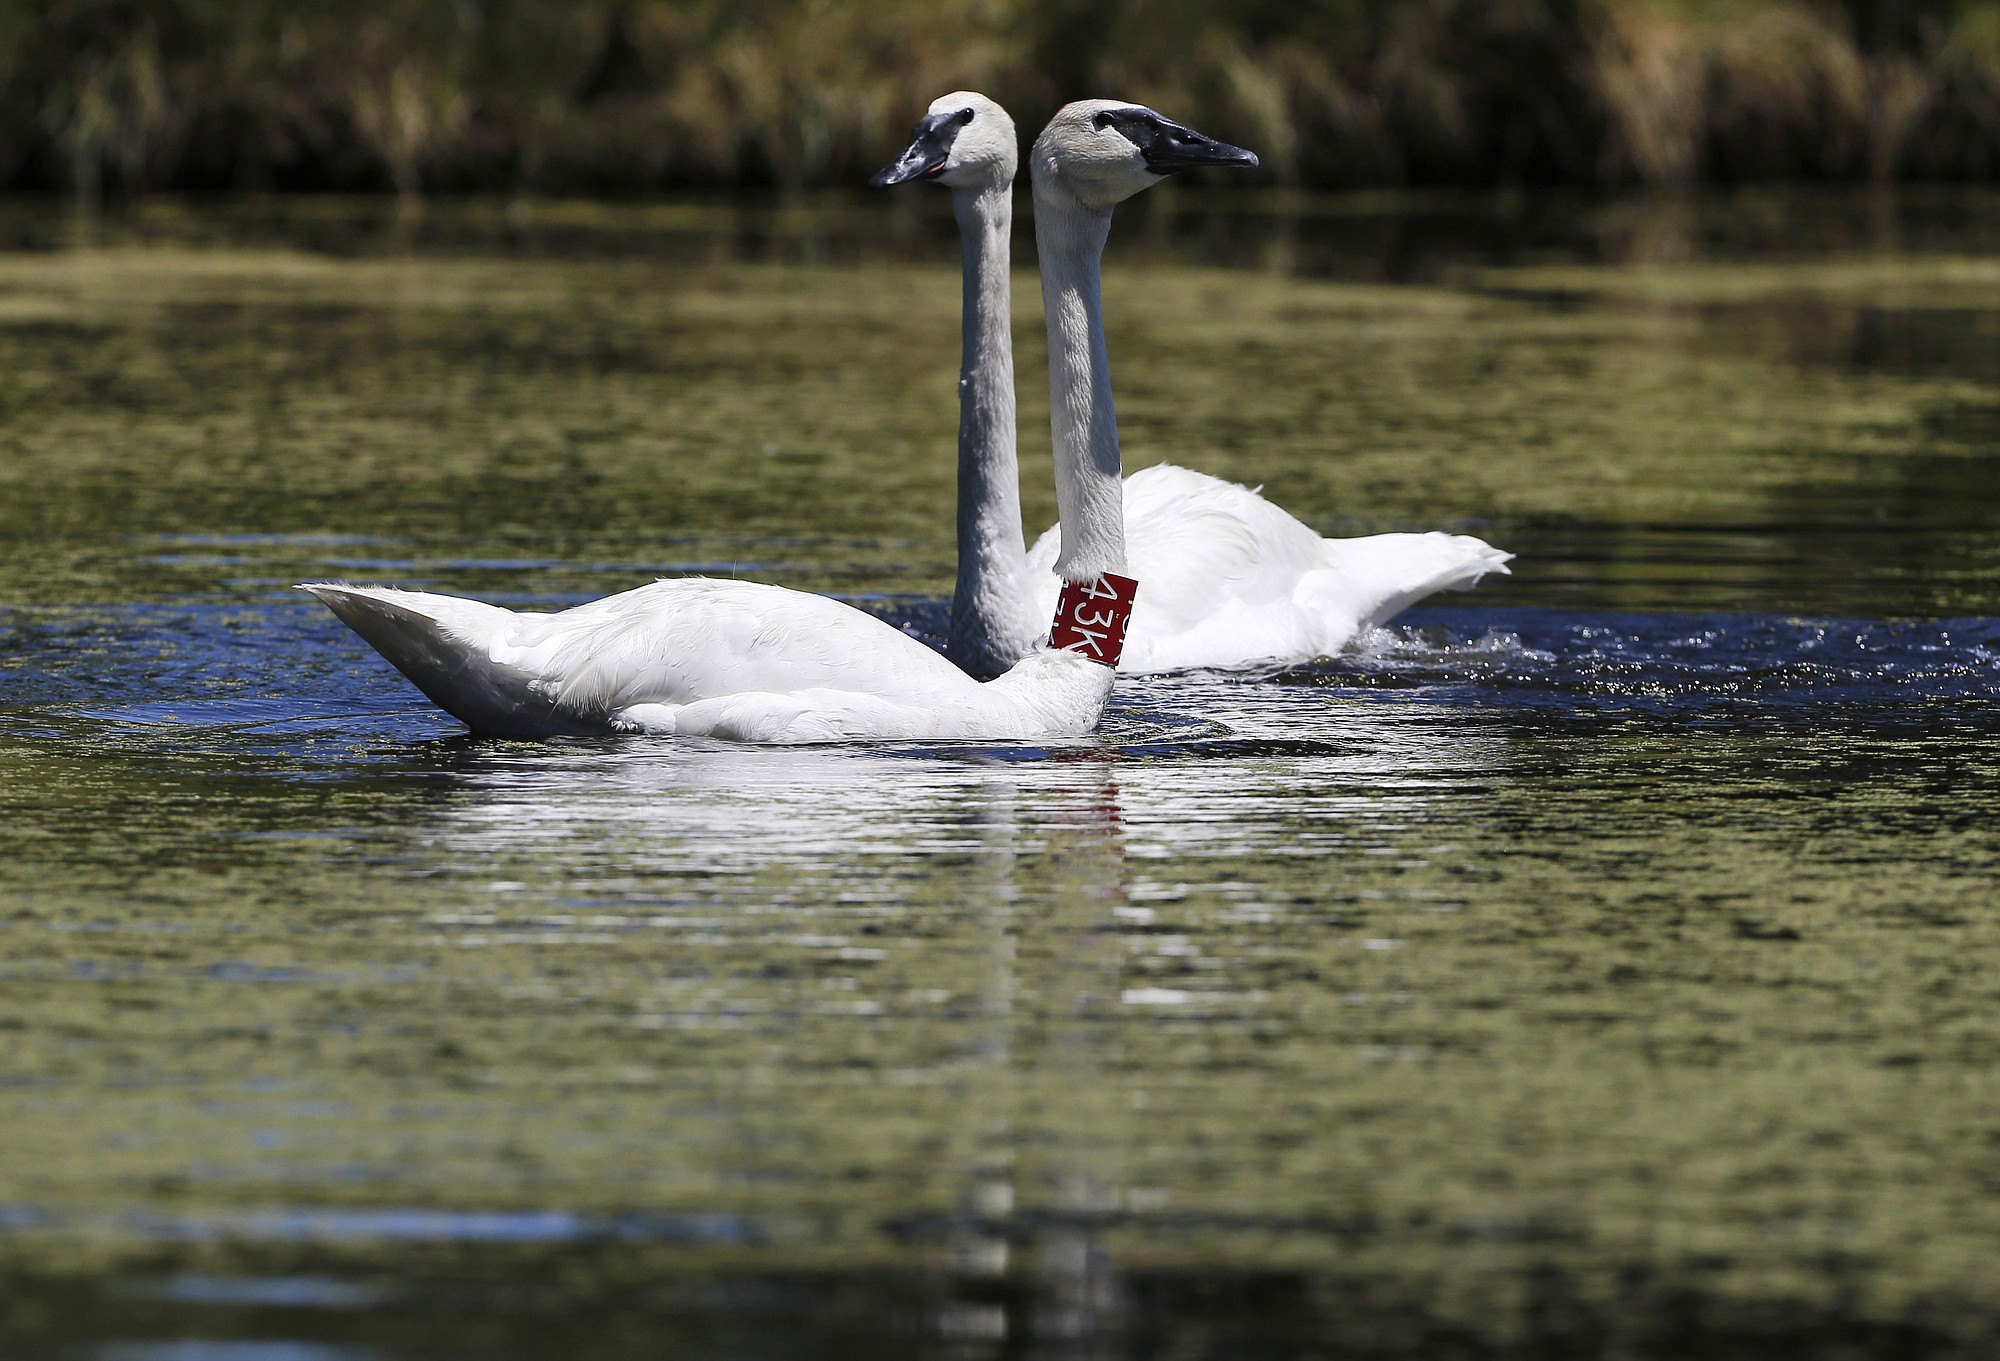 Trumpeter swans Chuck, left, with collar, and Grace swim around July 23 at the Sunriver Nature Center in Sunriver, Ore.